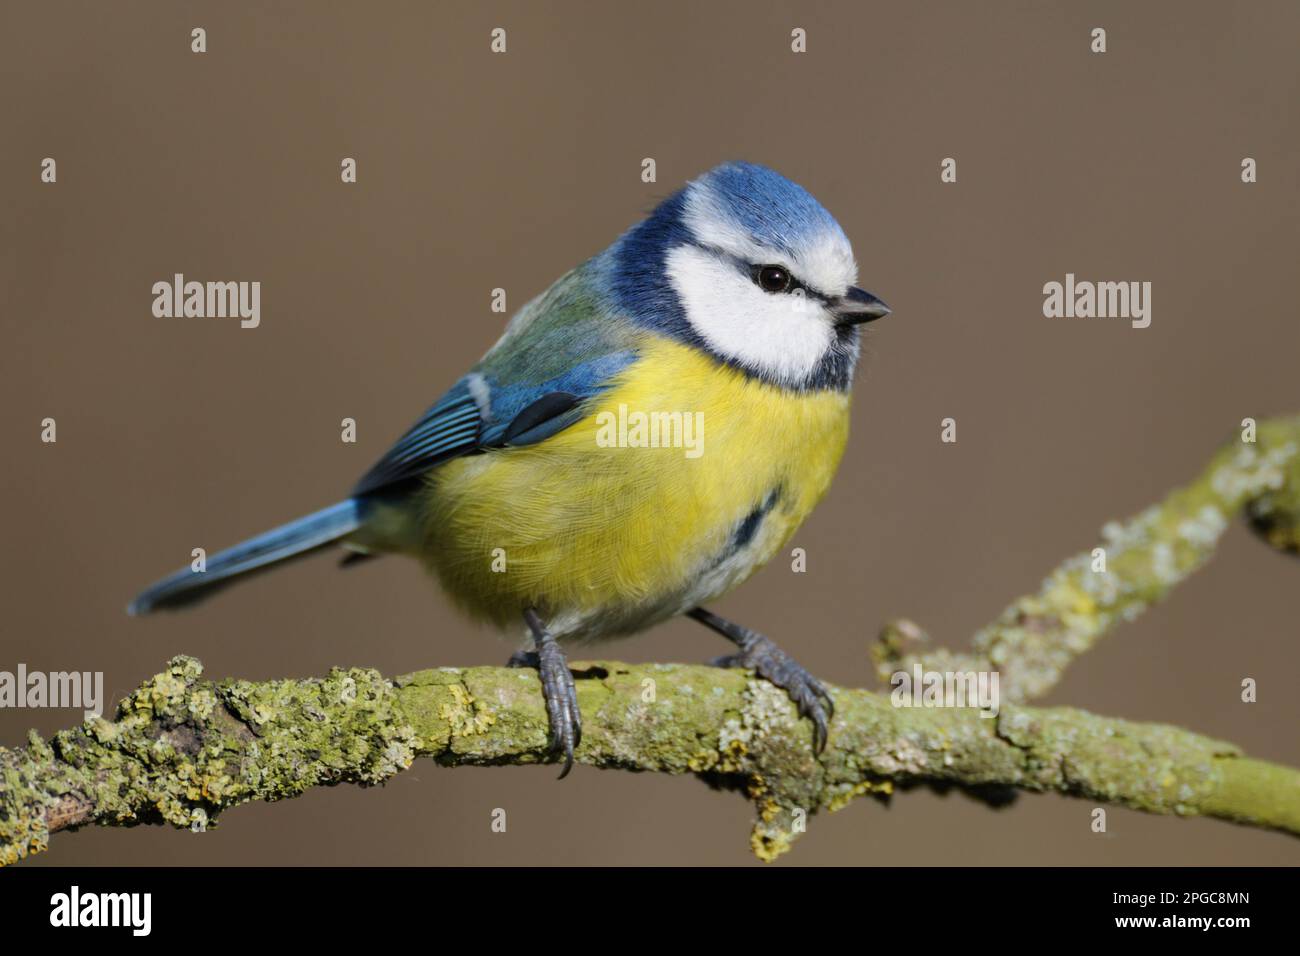 Bluetit perched on a branch, typical garden bird, little, funny and common songbird allover Europe, very detailed, nice light. Stock Photo